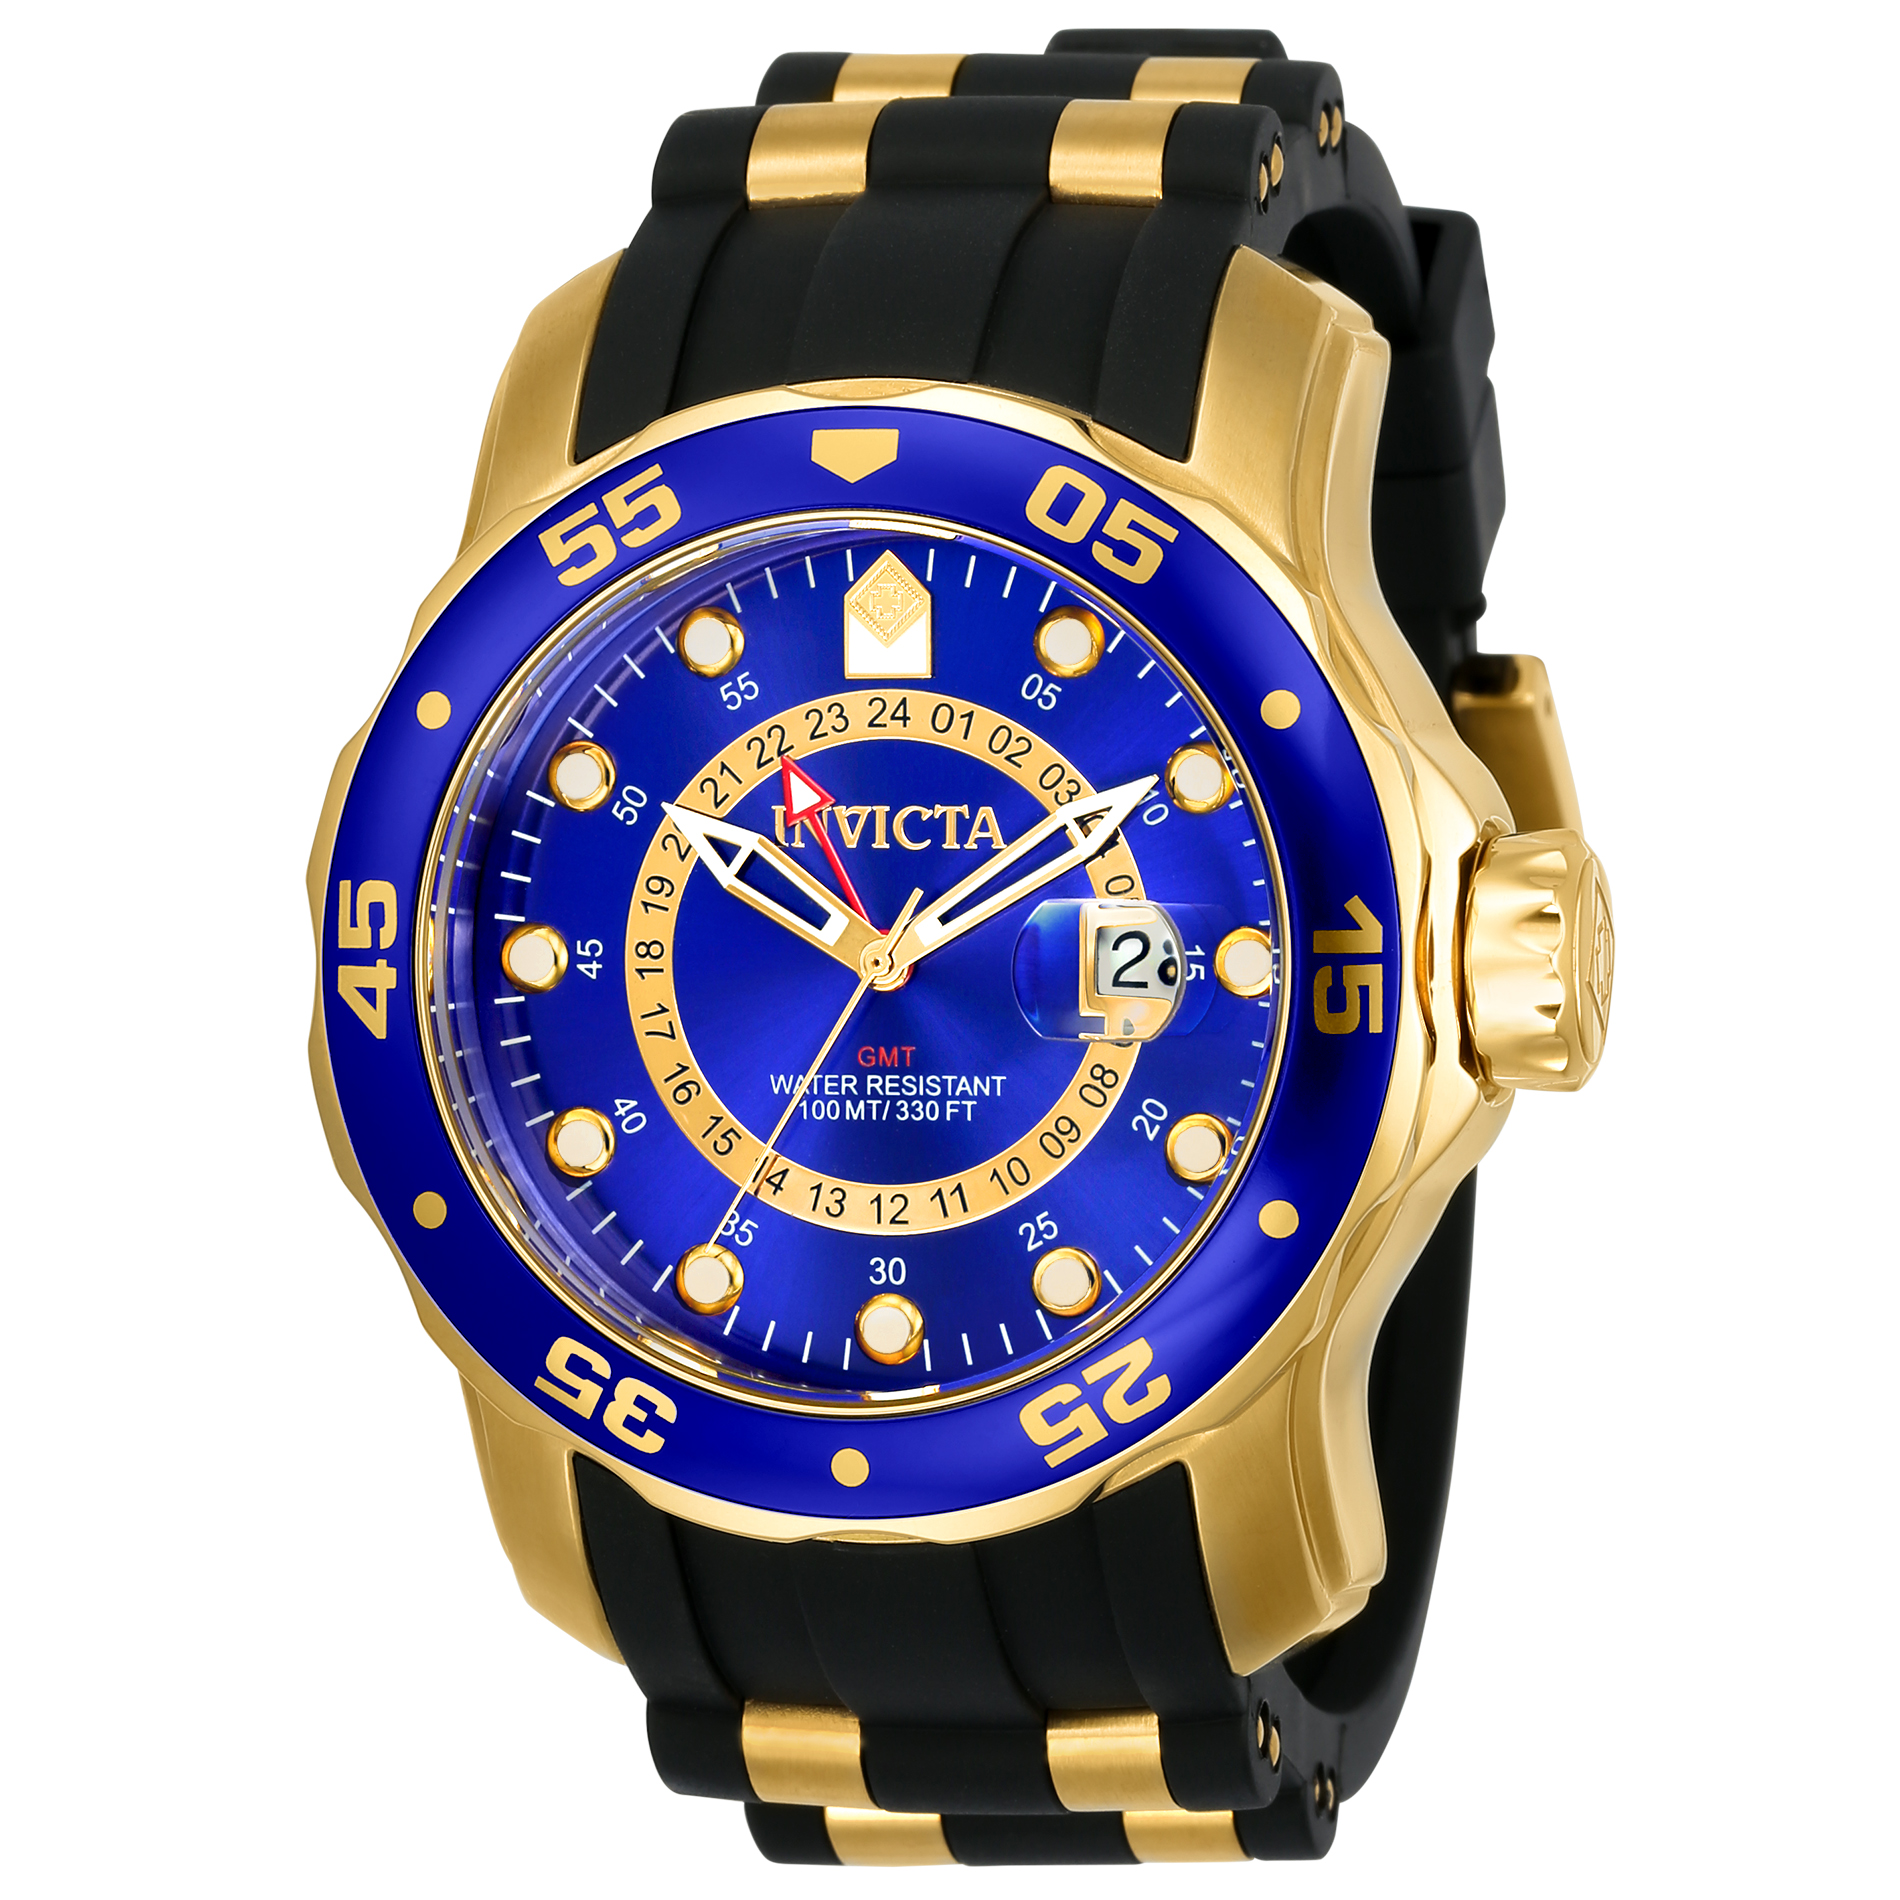 Pro Diver Men's 48.8MM Stainless Steel Silicone Strap Watch